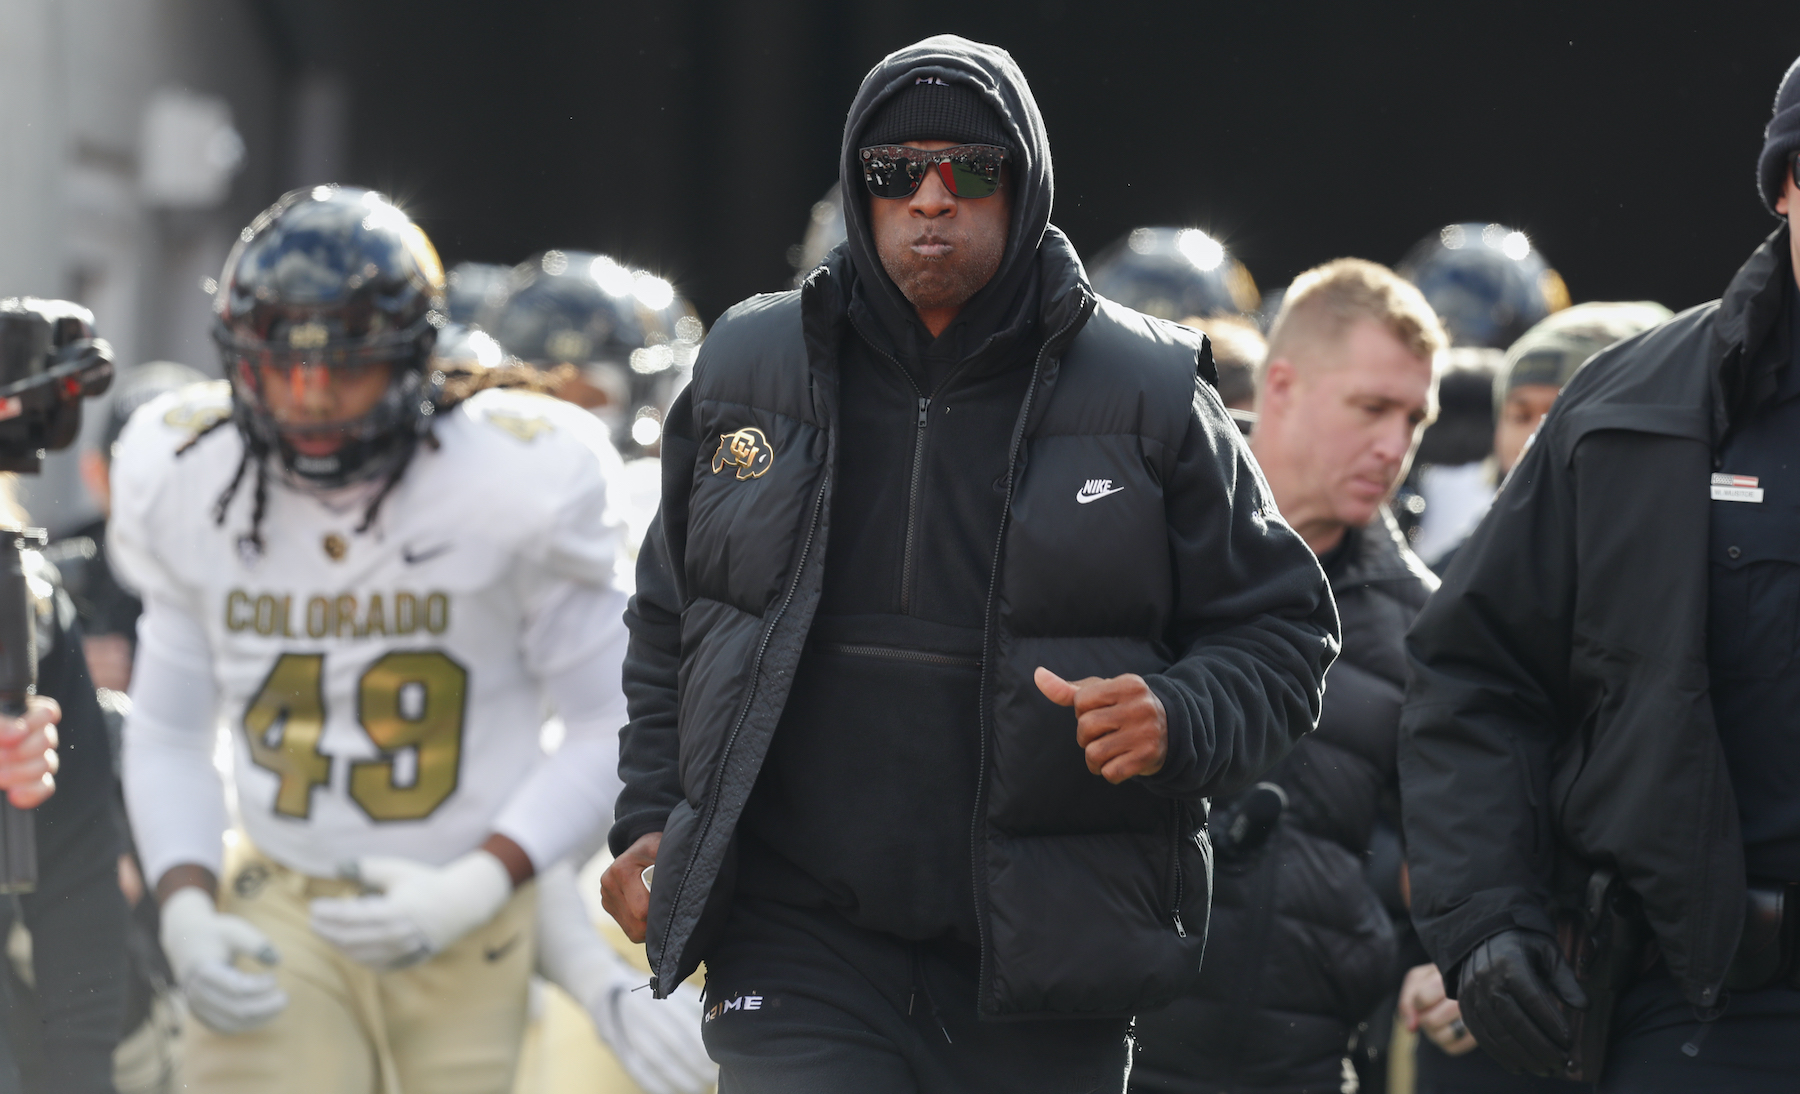 Deion Sanders jogs onto the field with the Colorado Buffaloes